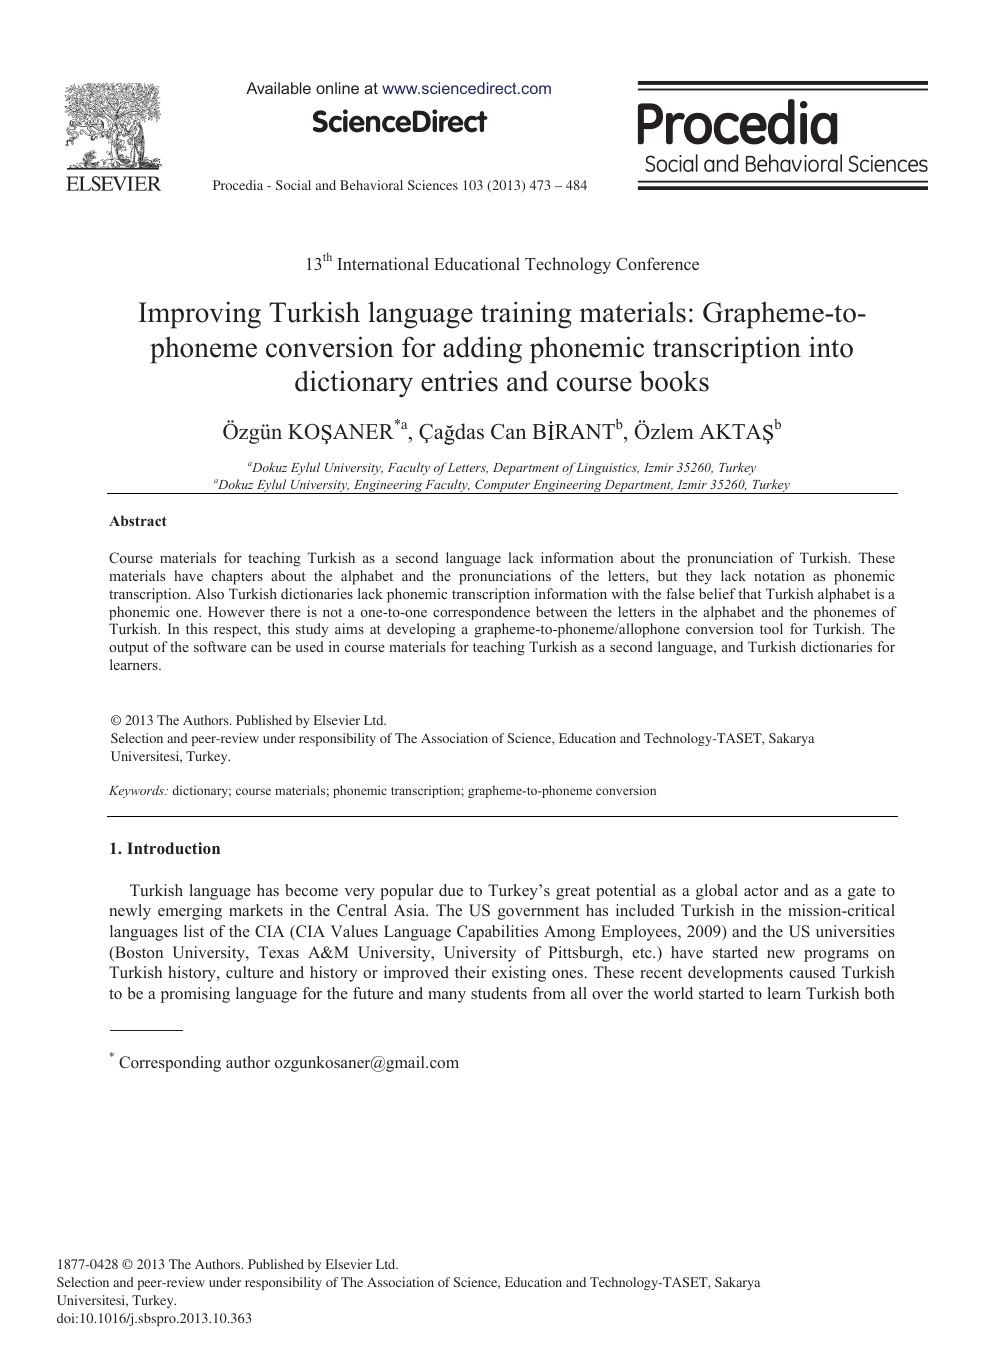 Improving Turkish Language Training Materials Grapheme To Phoneme Conversion For Adding Phonemic Transcription Into Dictionary Entries And Course Books Topic Of Research Paper In Computer And Information Sciences Download Scholarly Article Pdf